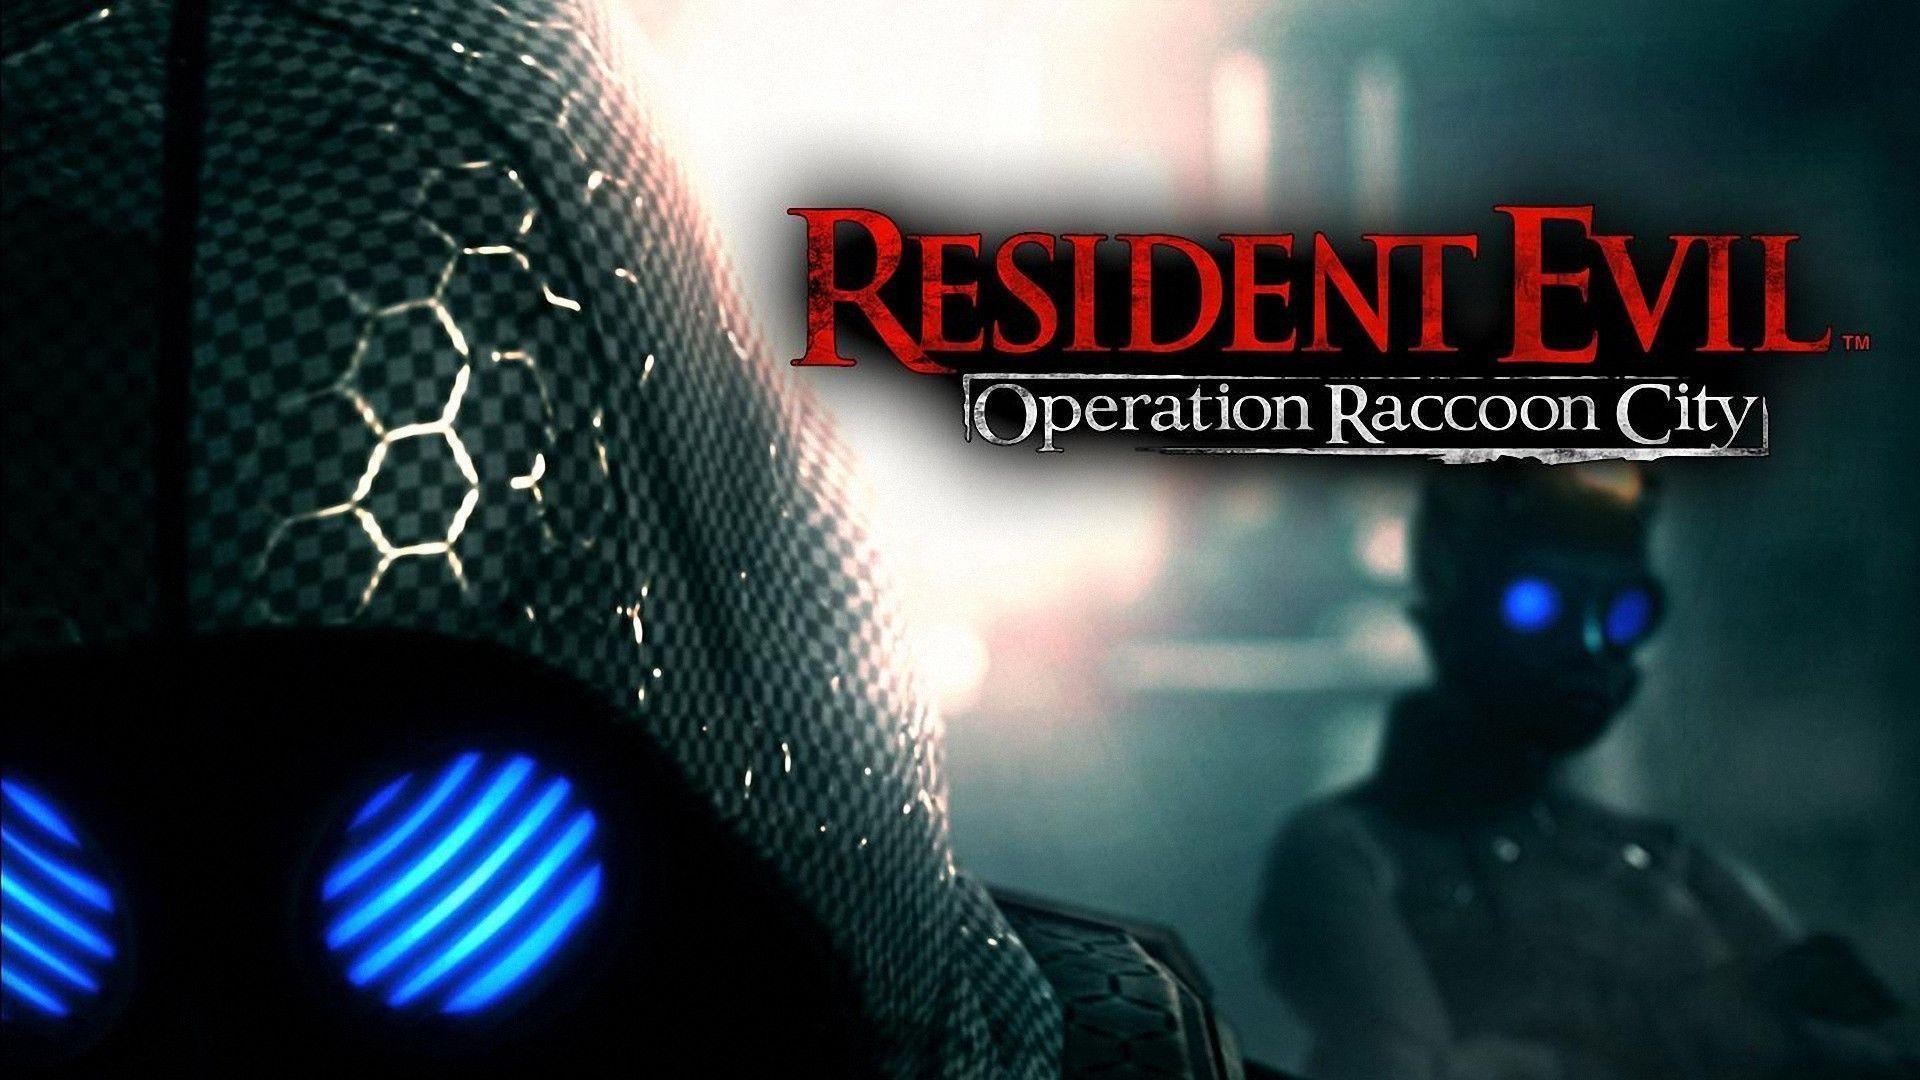 Resident Evil: Operation Raccoon City Wallpaper in HD